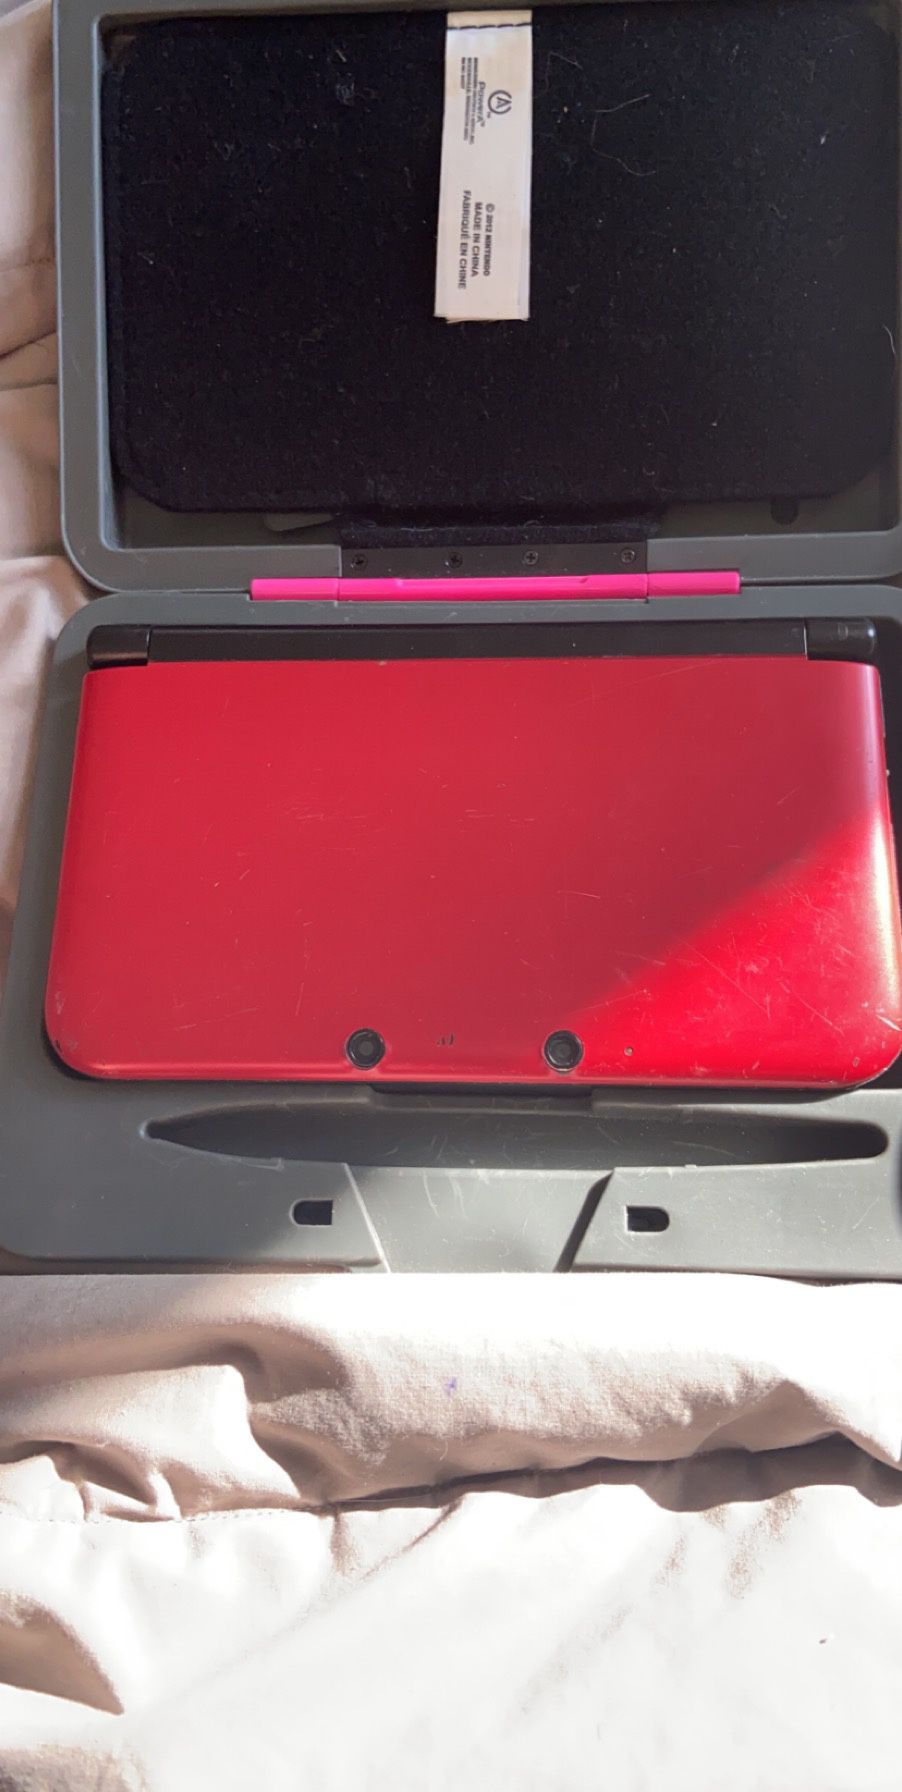 Nintendo 3ds XL and case